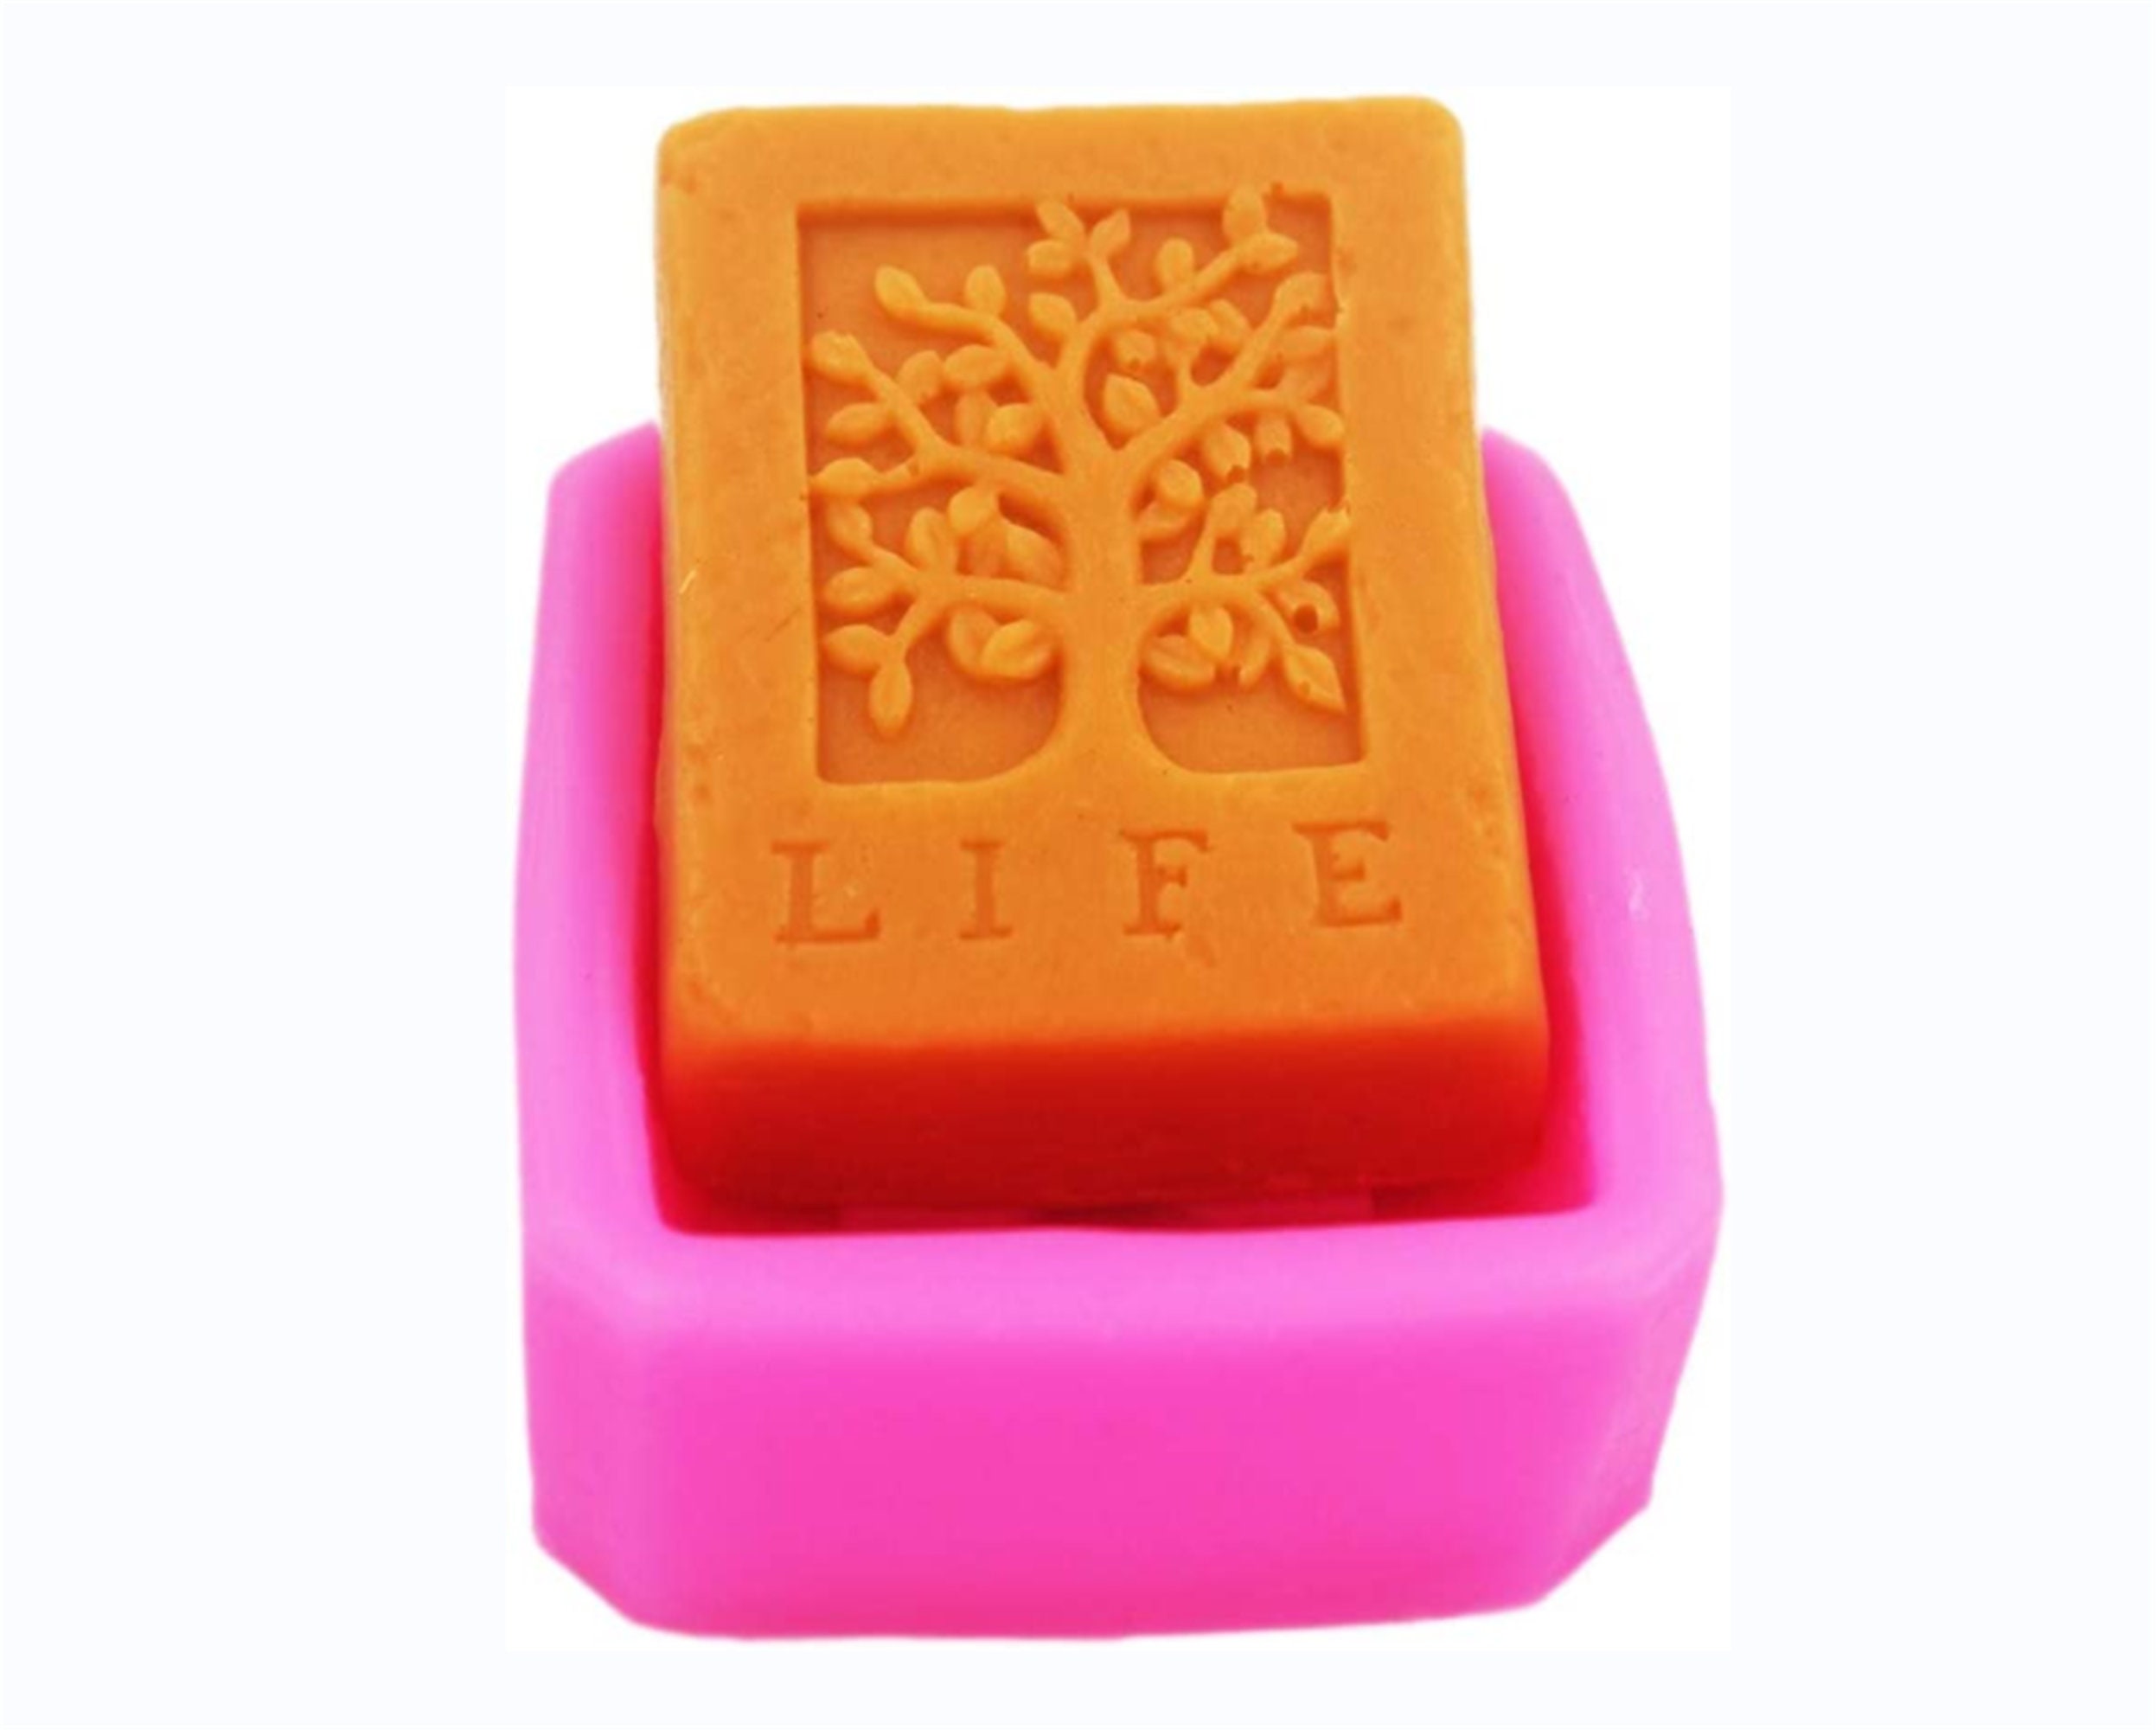 Life Tree Rectangle Silicone Soap Mold Craft Molds DIY Handmade Soap Mould